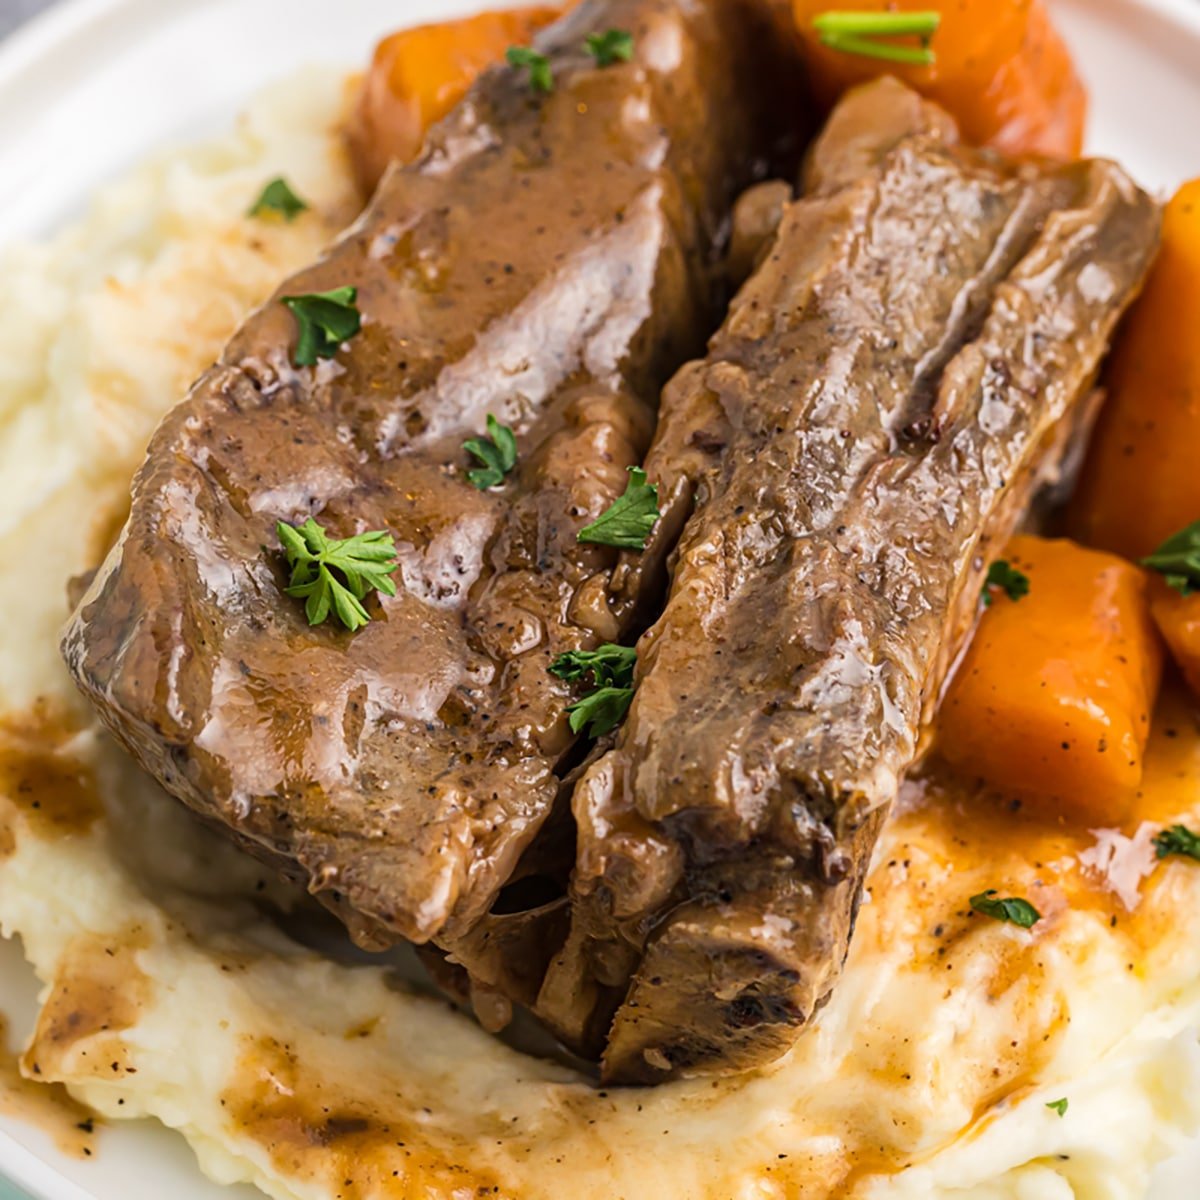 short ribs on mashed potatoes and carrots.